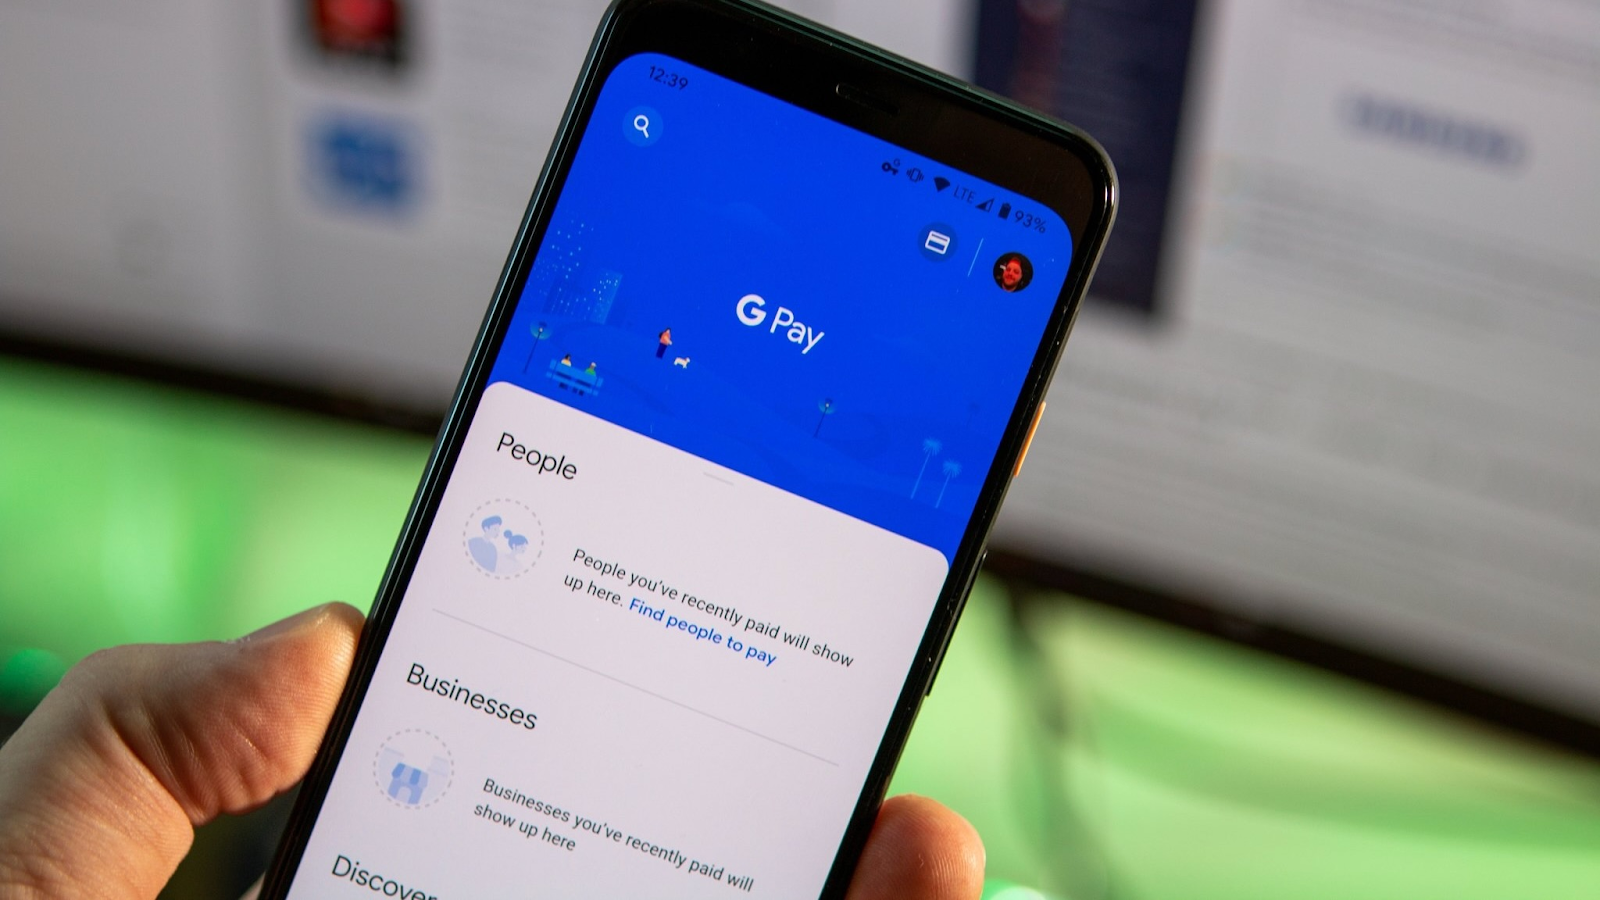 Google Pay, formerly Android Pay